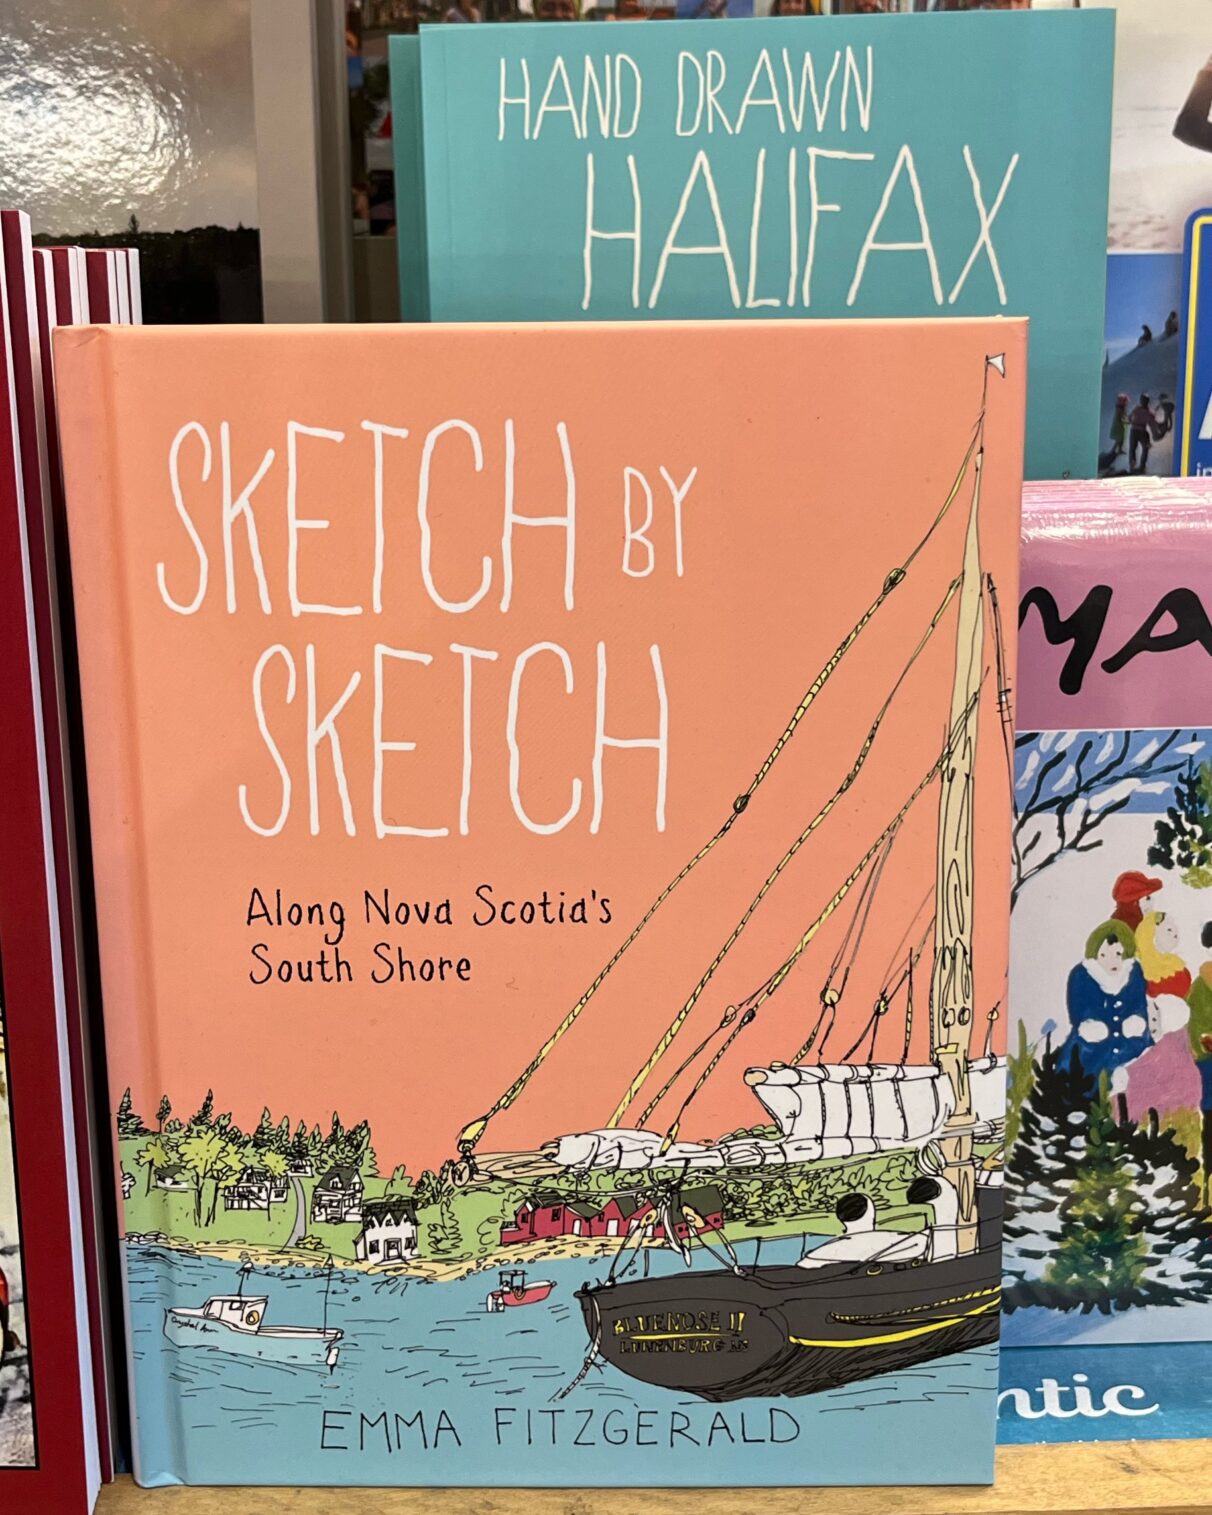 Emma FitzGerald's book, 'Sketch by Sketch' is on the counter at a book store. The book has a picture of the Bluenose on the cover. Behind is her book Hand Drawn Halifax.